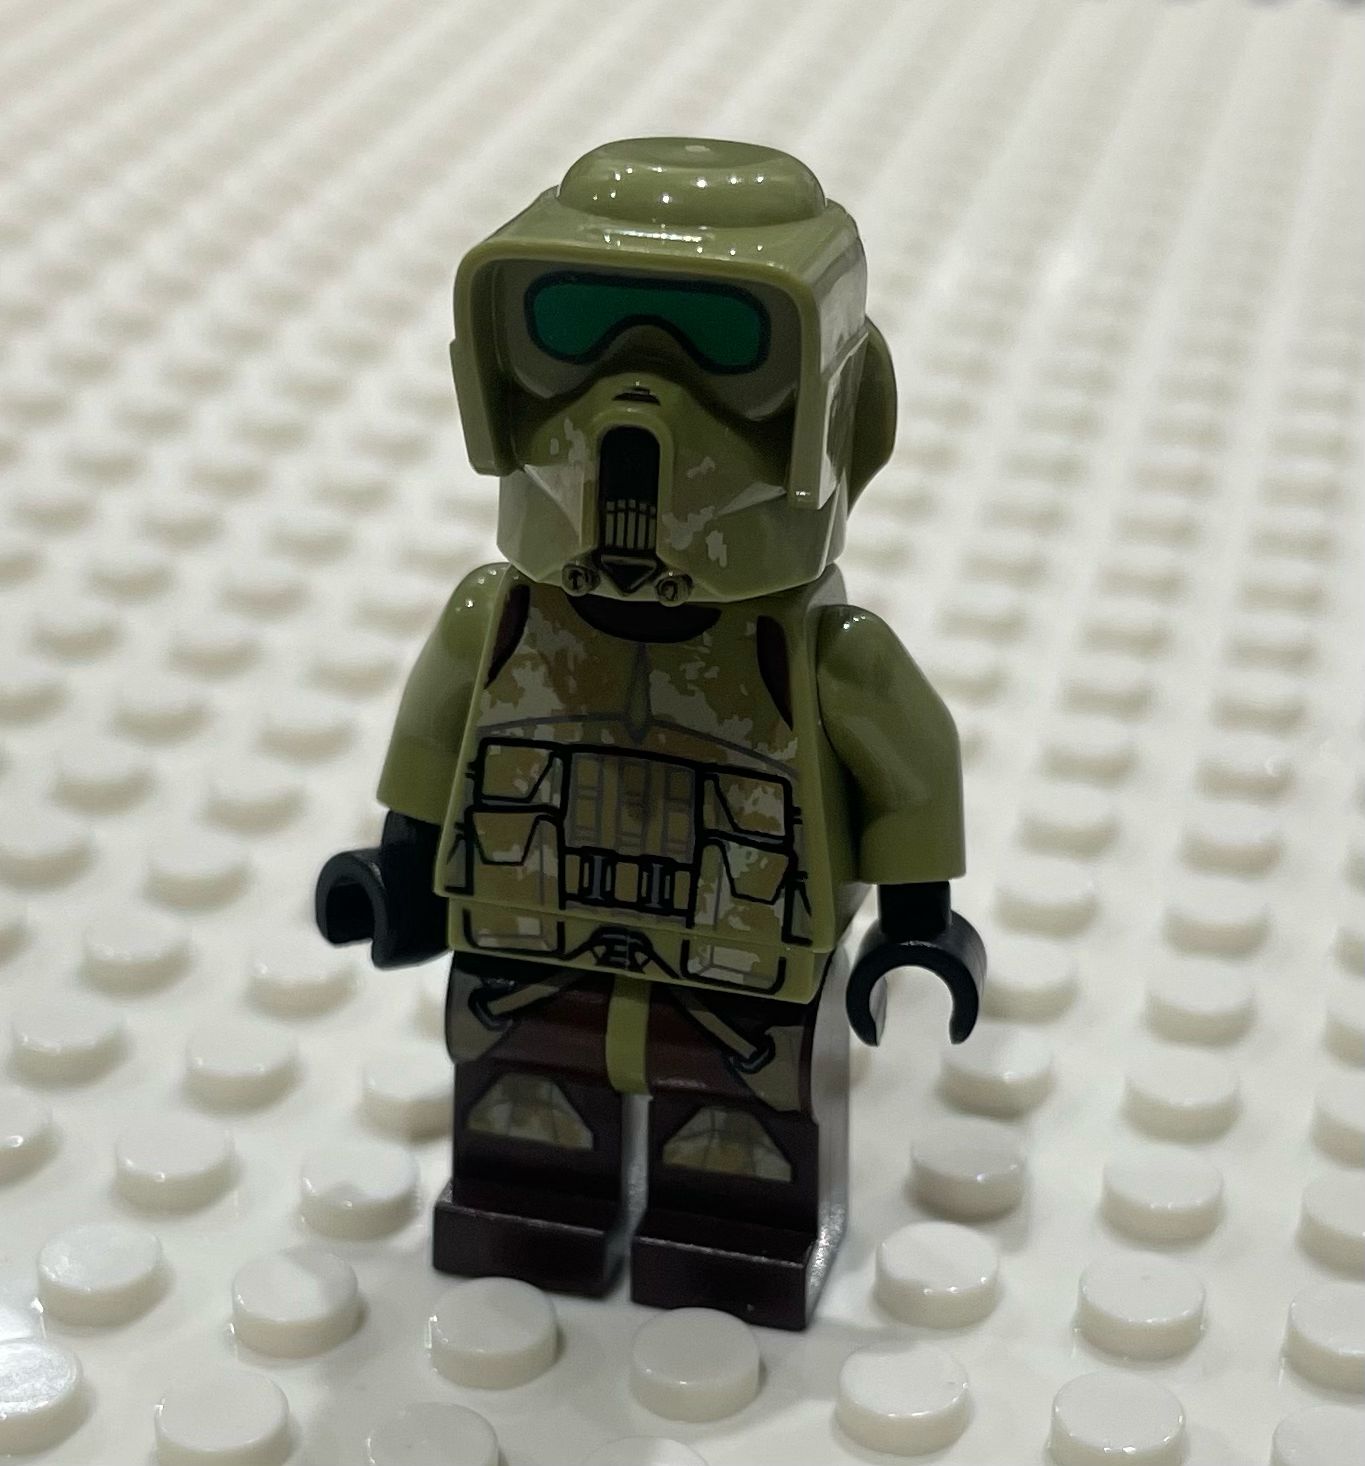 SW0518: Clone Scout Trooper, 41st Elite Corps (Phase 2) - Kashyyyk Camouflage, Scowl